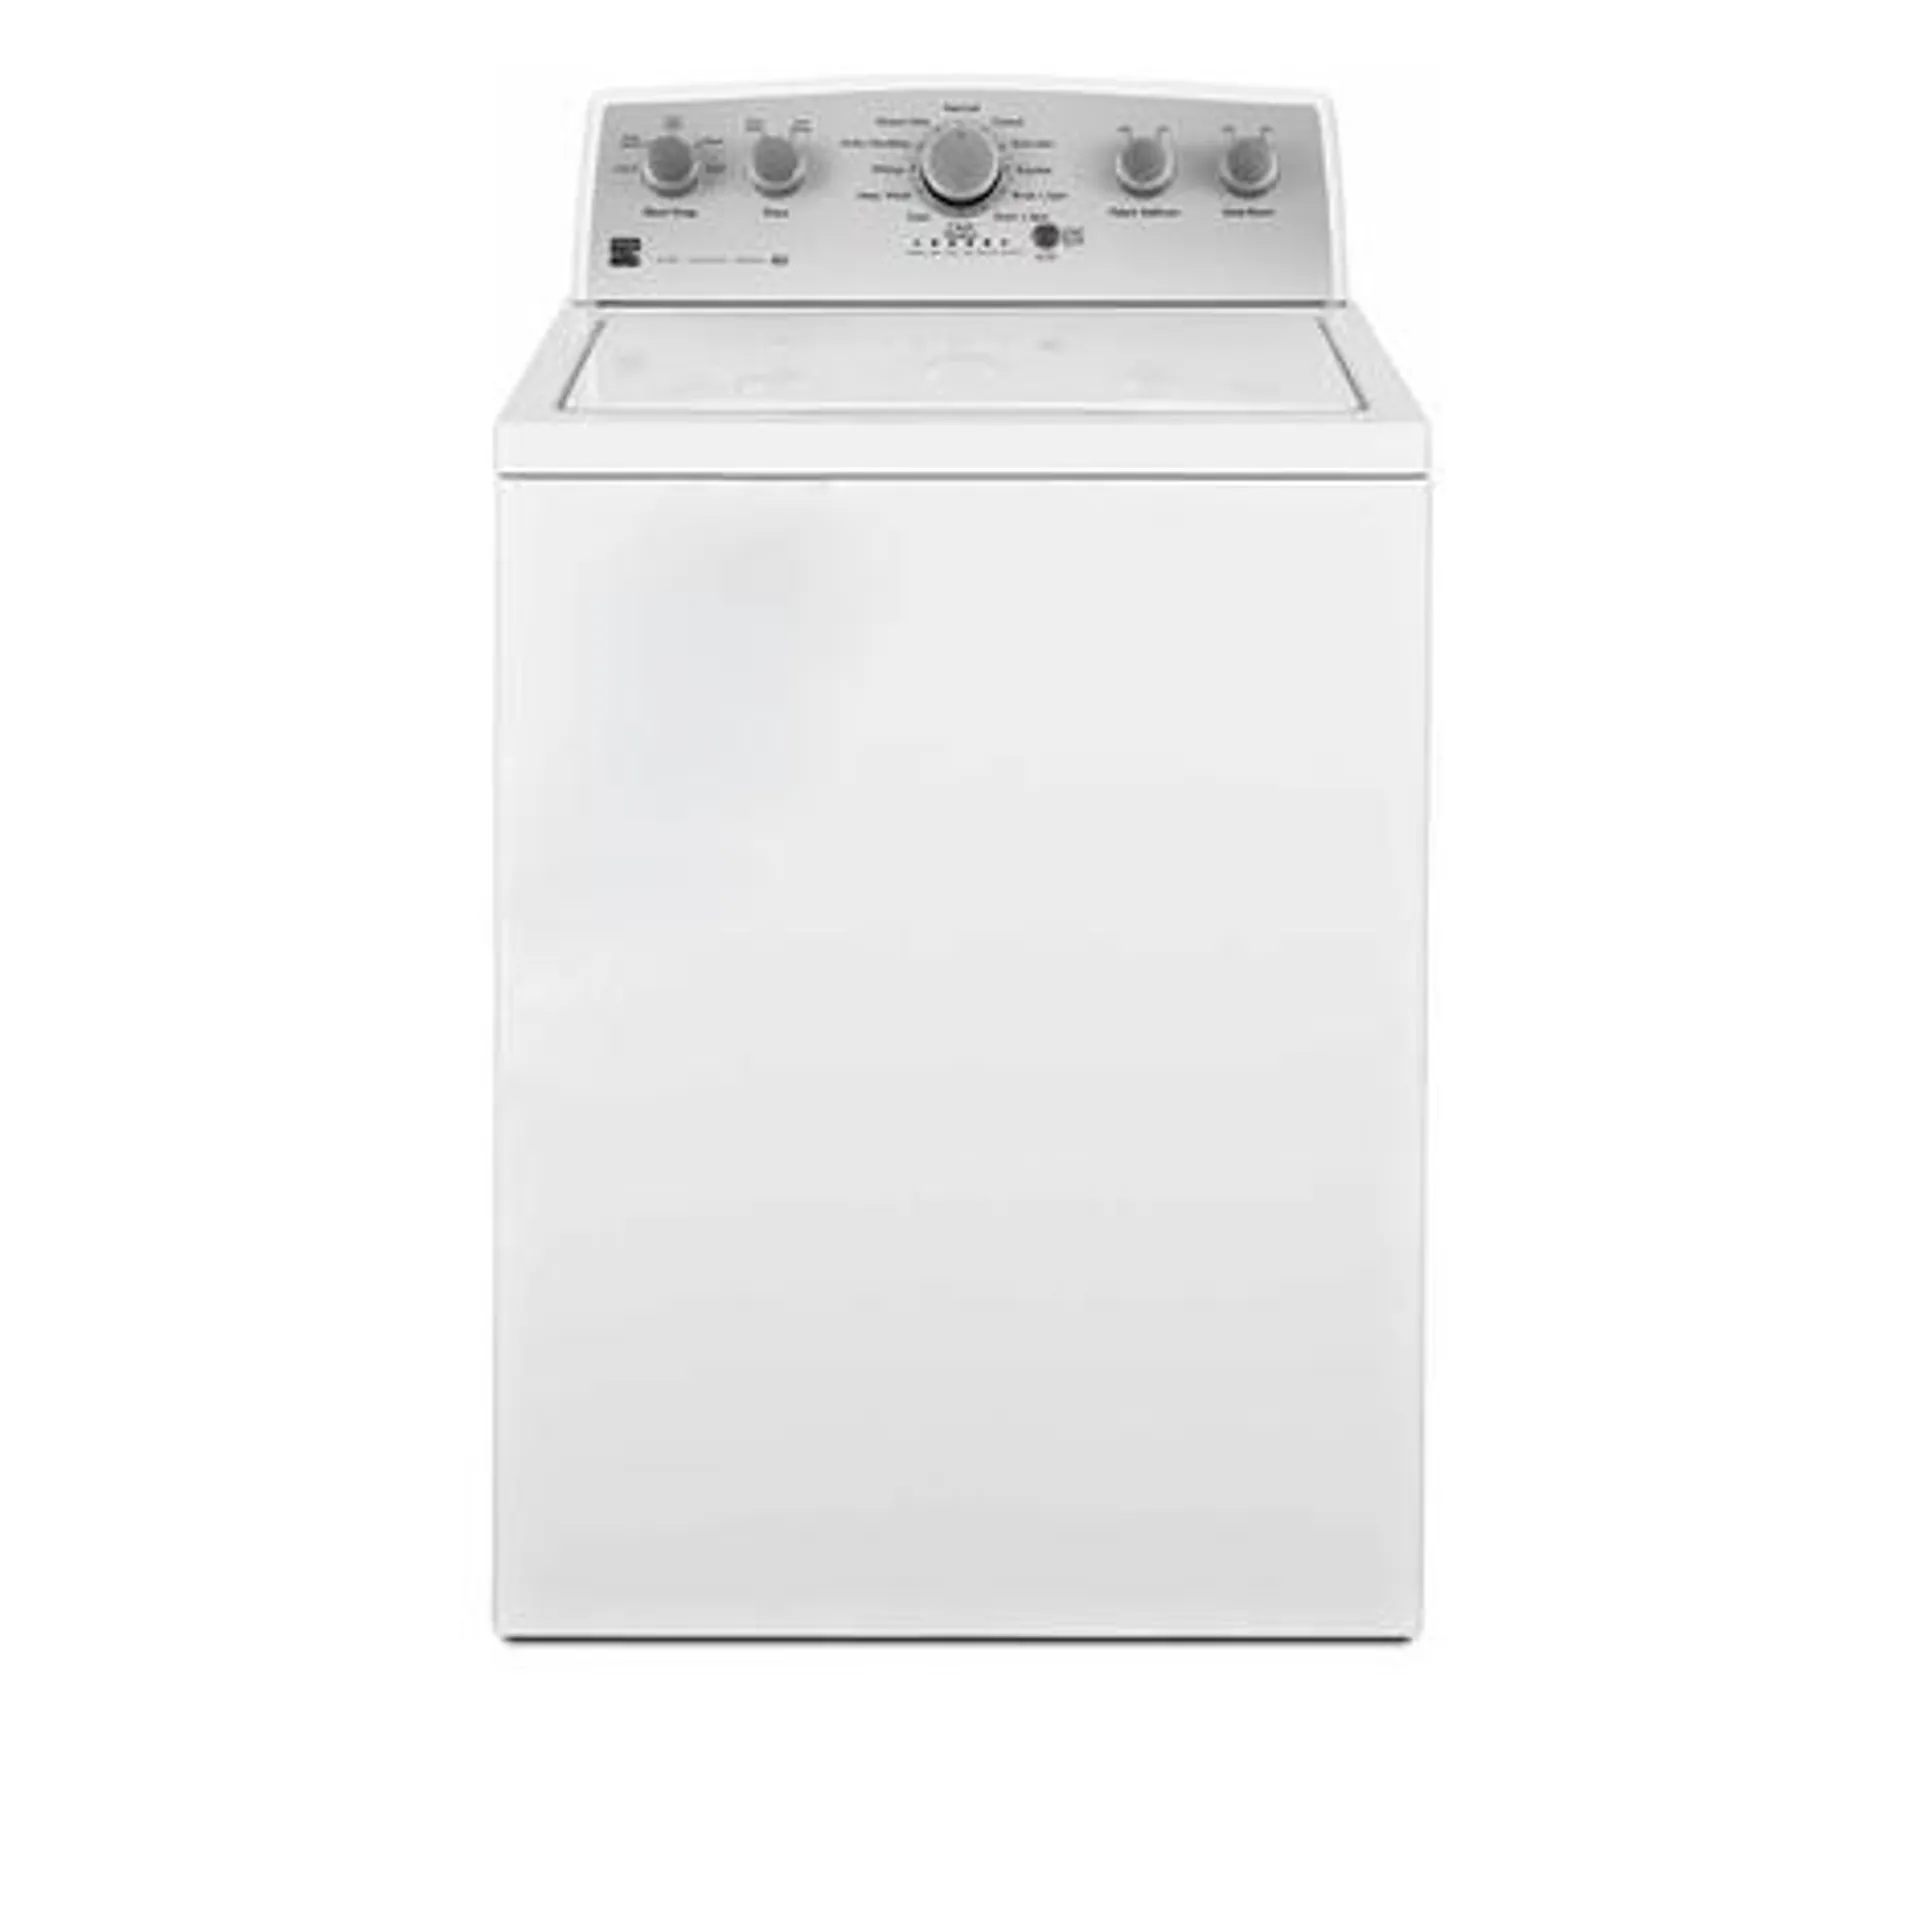 Kenmore 25132 4.3 cu. ft. Top Load Washer w/Triple Action Impeller - White